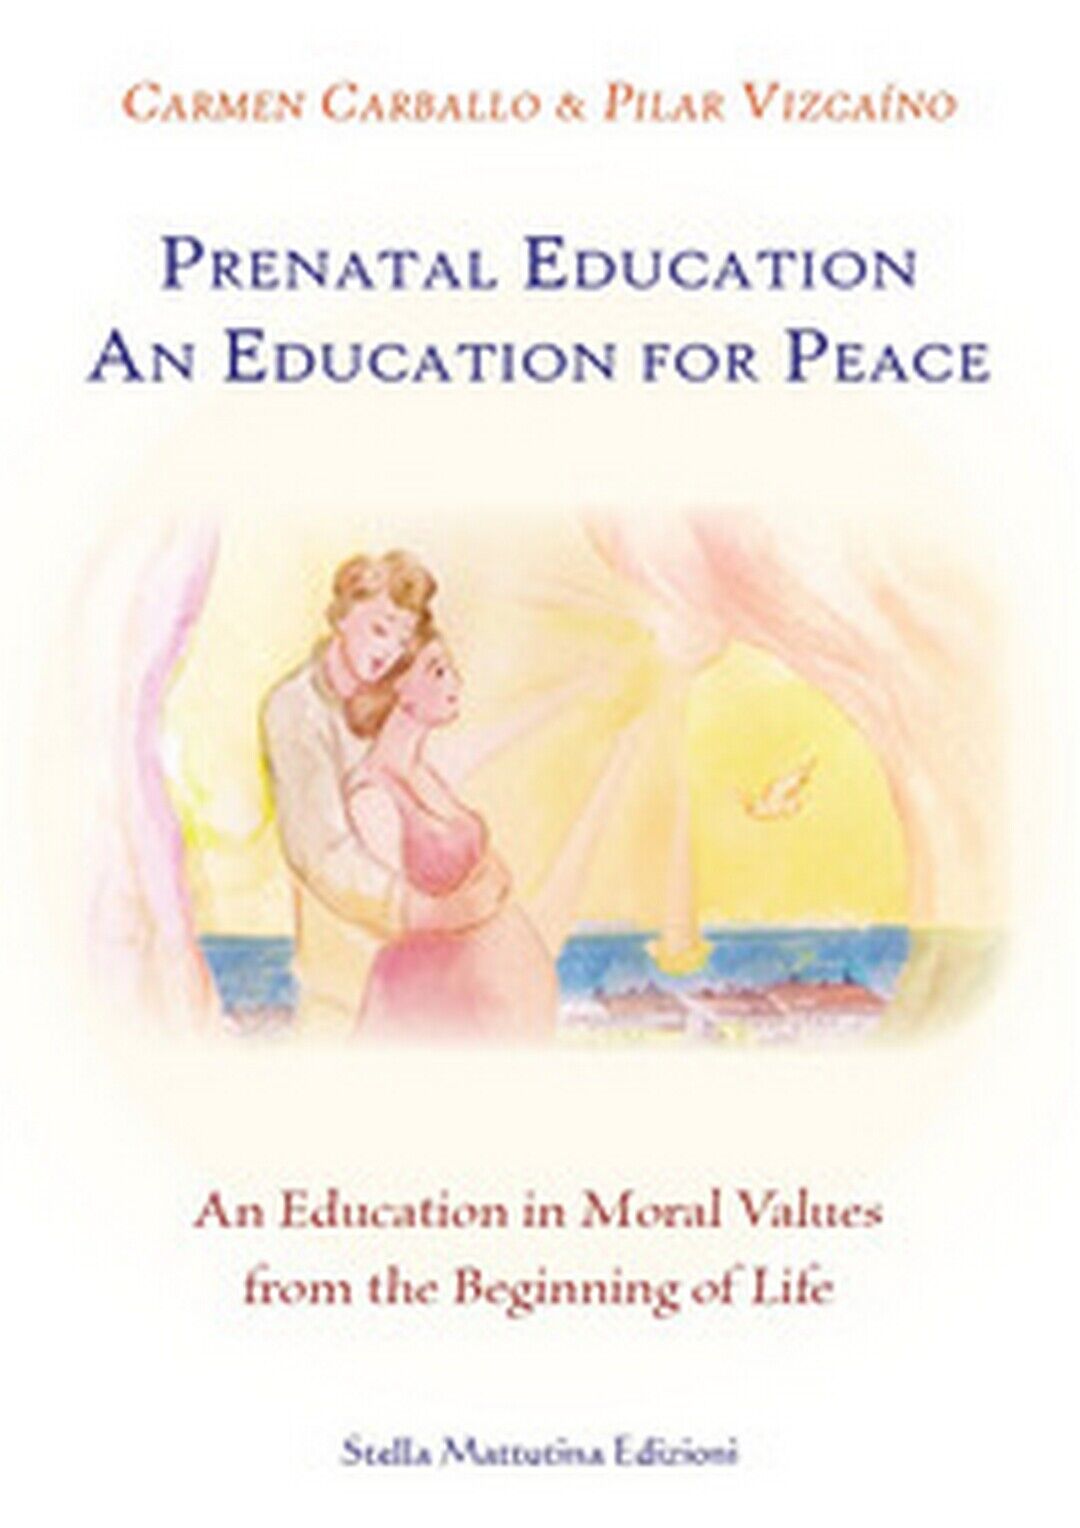 Prenatal education. An education for peace. An education in moral values from... libro usato